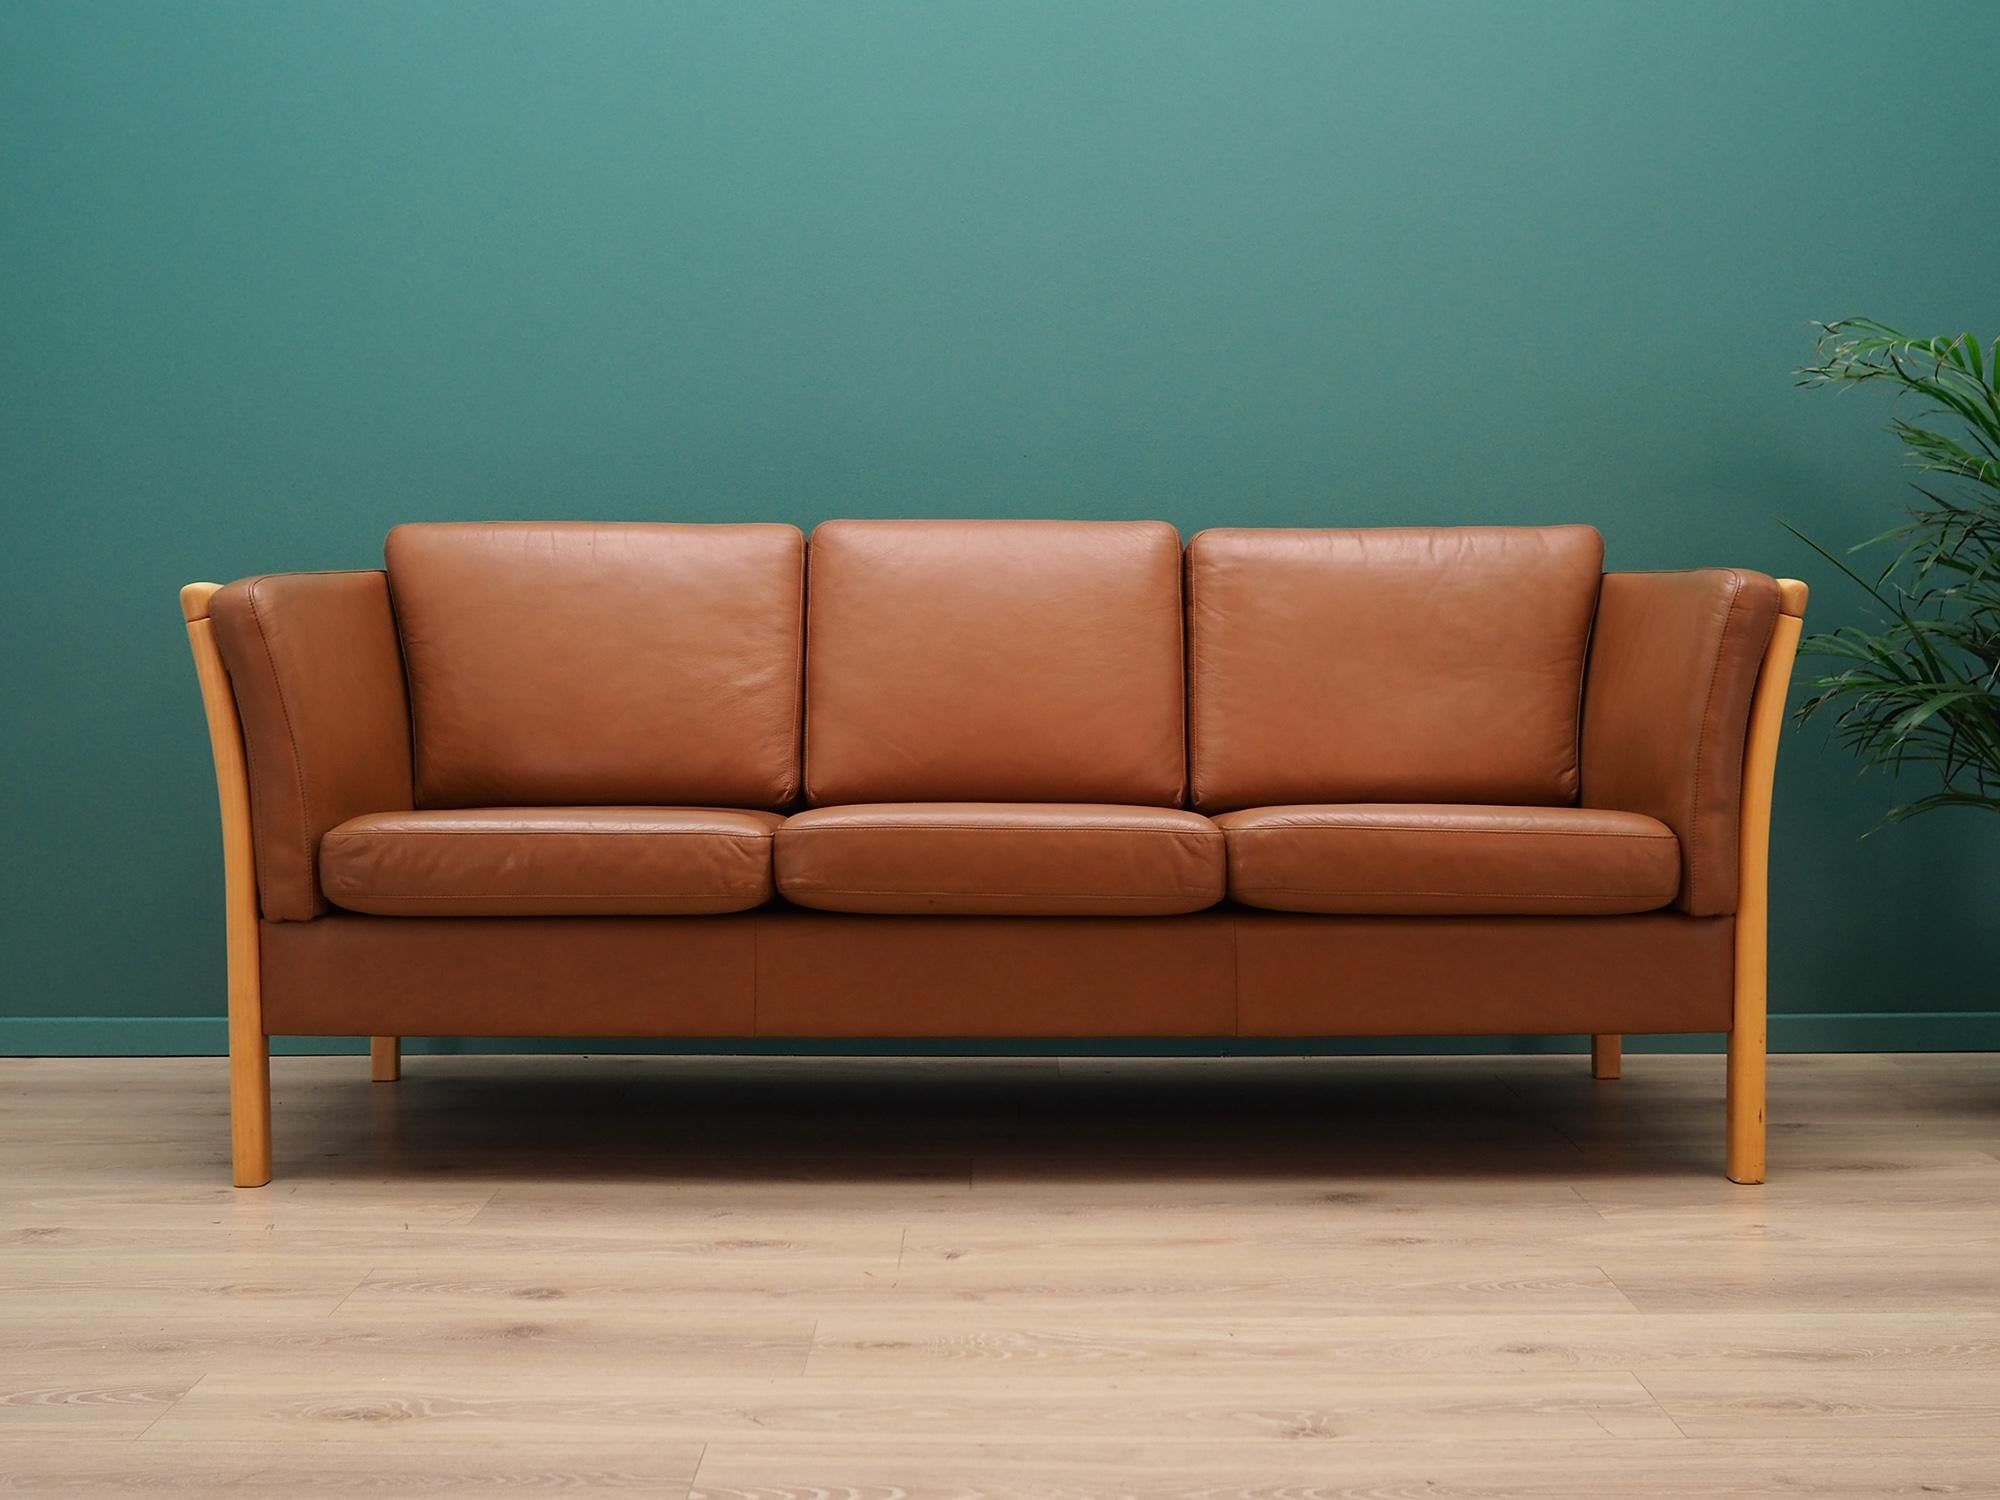 Fantastic sofa from the 1960s-1970s. Scandinavian design, Minimalist form. Manufactured in the Stouby workshop. Original upholstery made of leather in brown, beech construction. Preserved in good condition (minor bruises and scratches) - directly